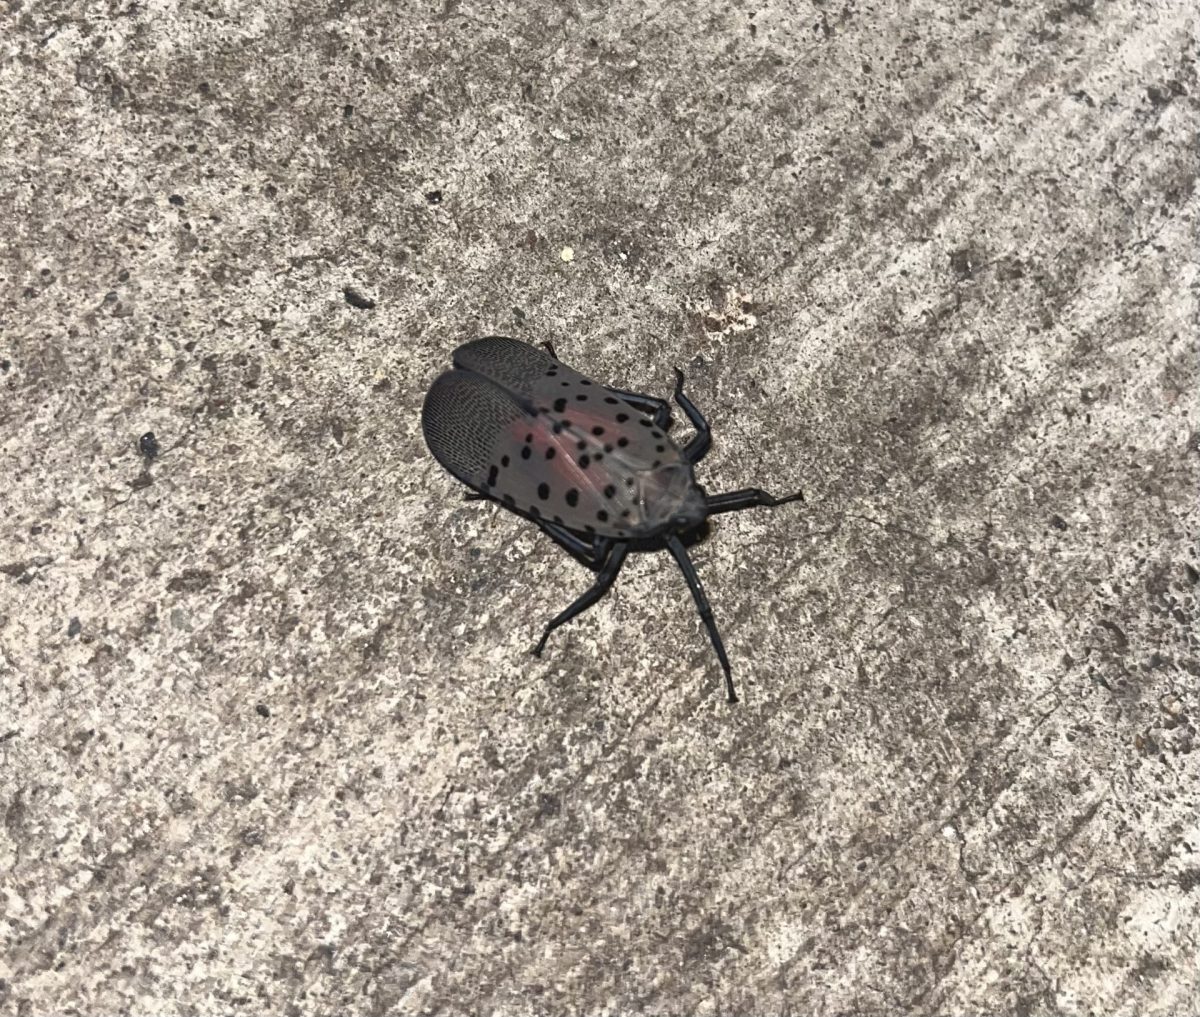 Live Spotted Lantern Fly sitting in town area waiting to be squashed. Photo by Carly Busfield. 